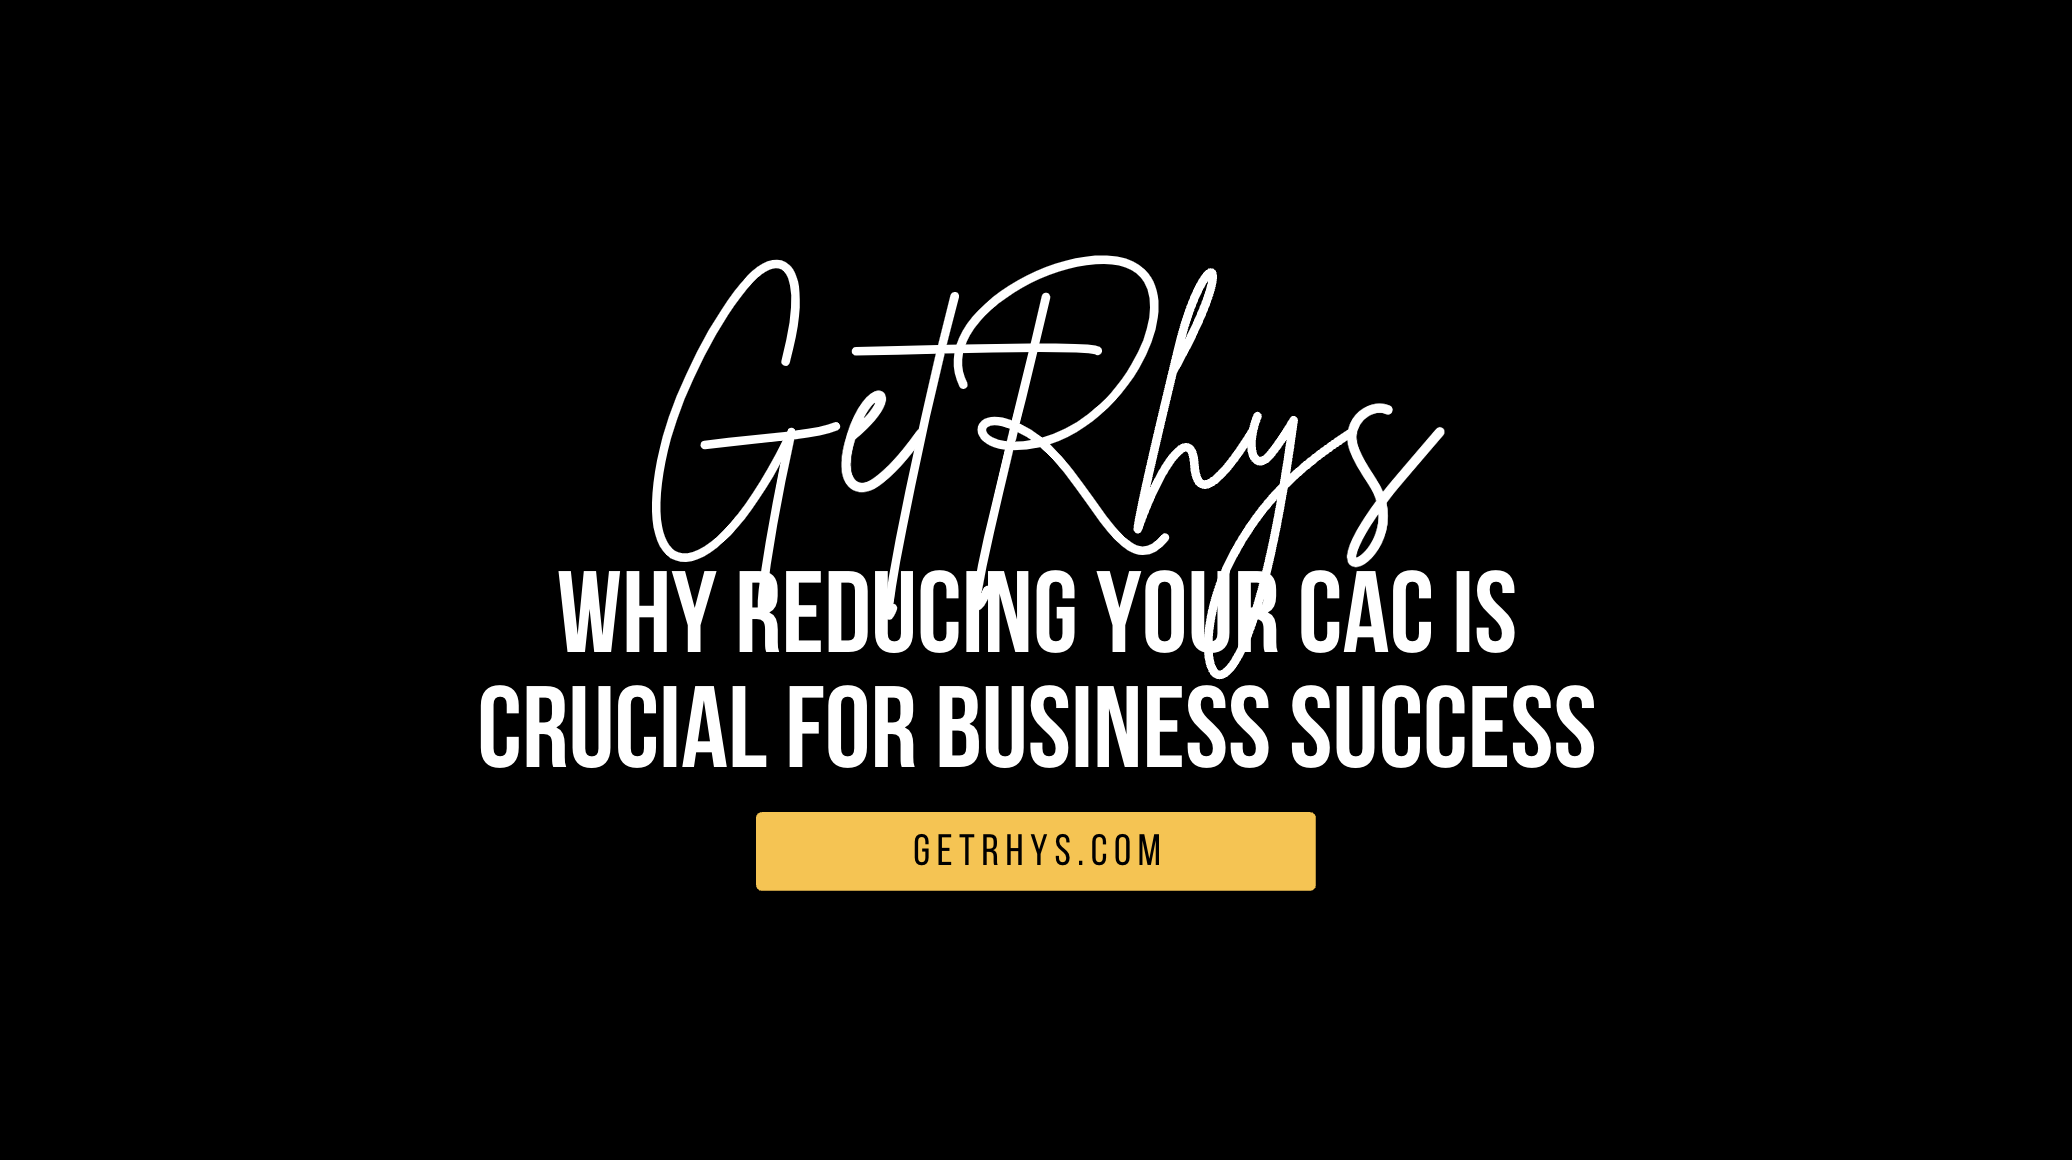 Why reducing your CAC is crucial for business success